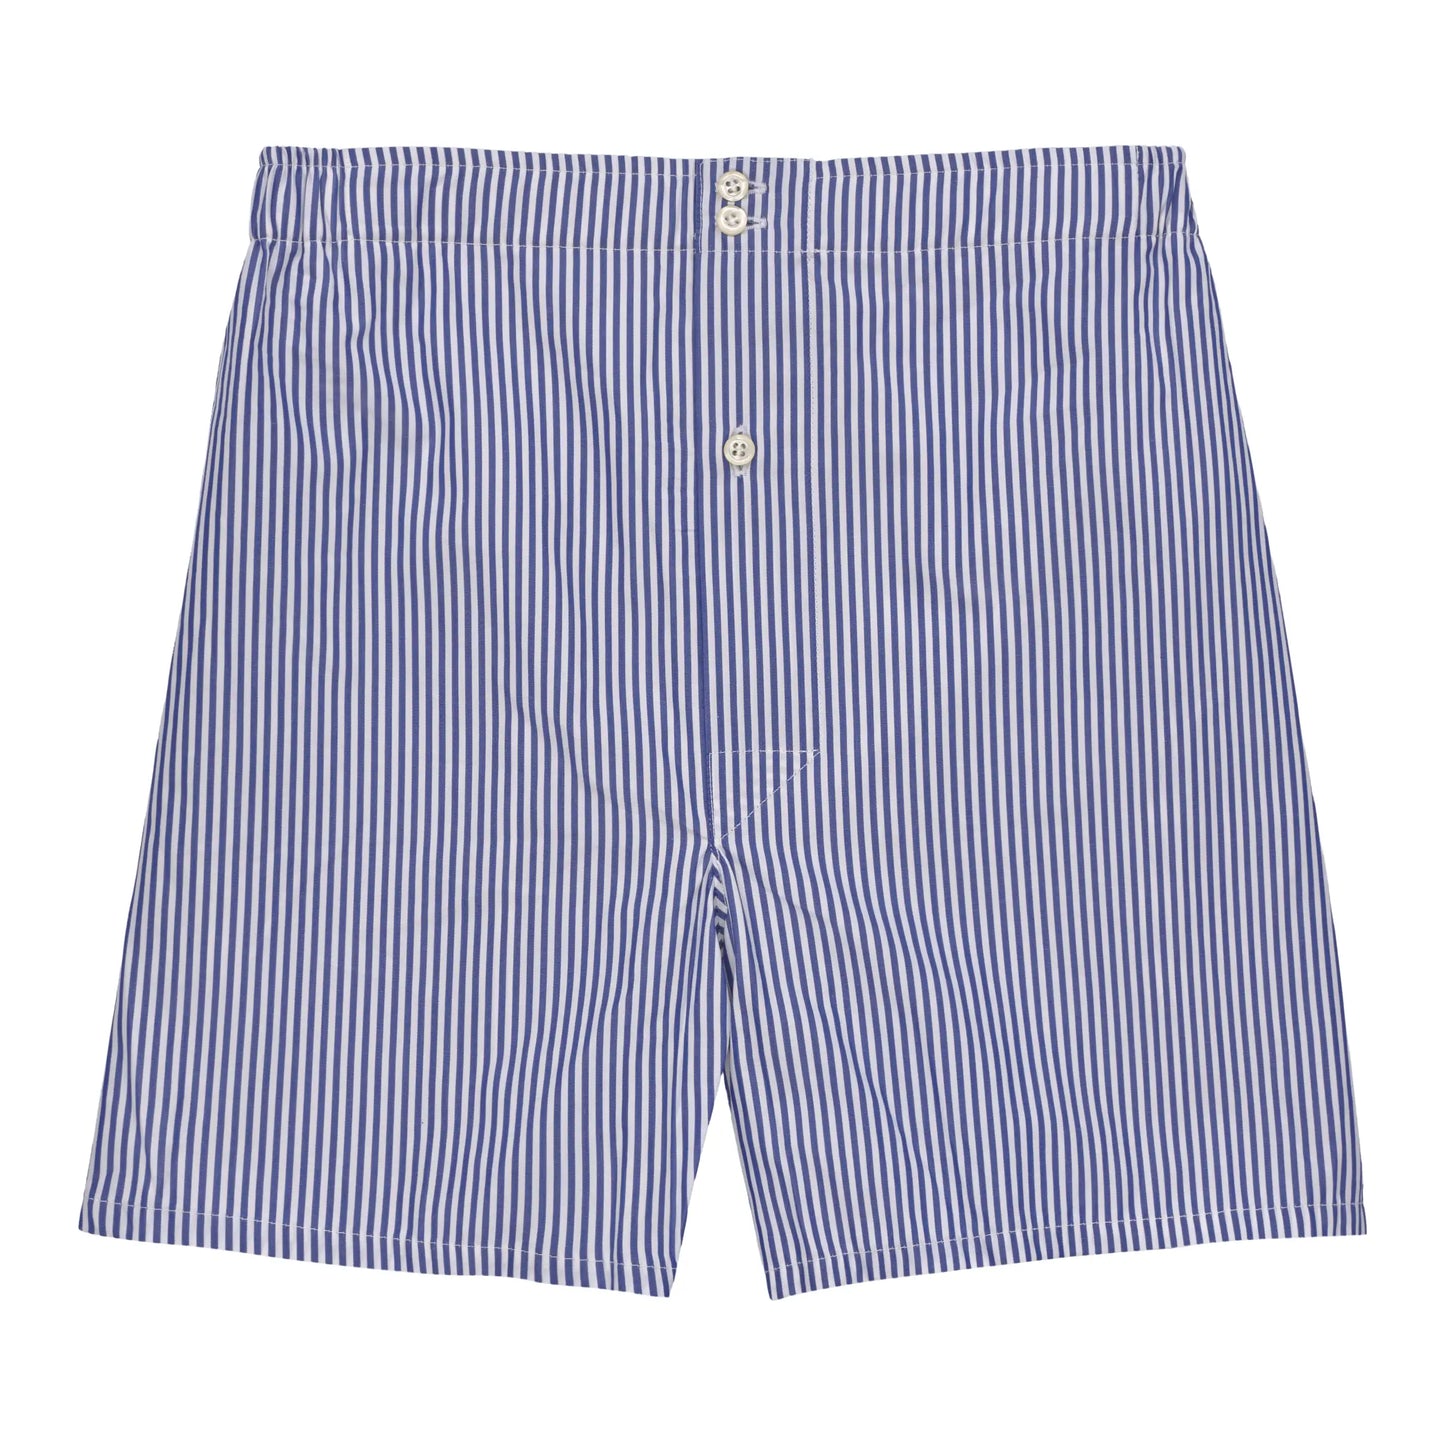 Striped Boxer Shorts in Blue and White